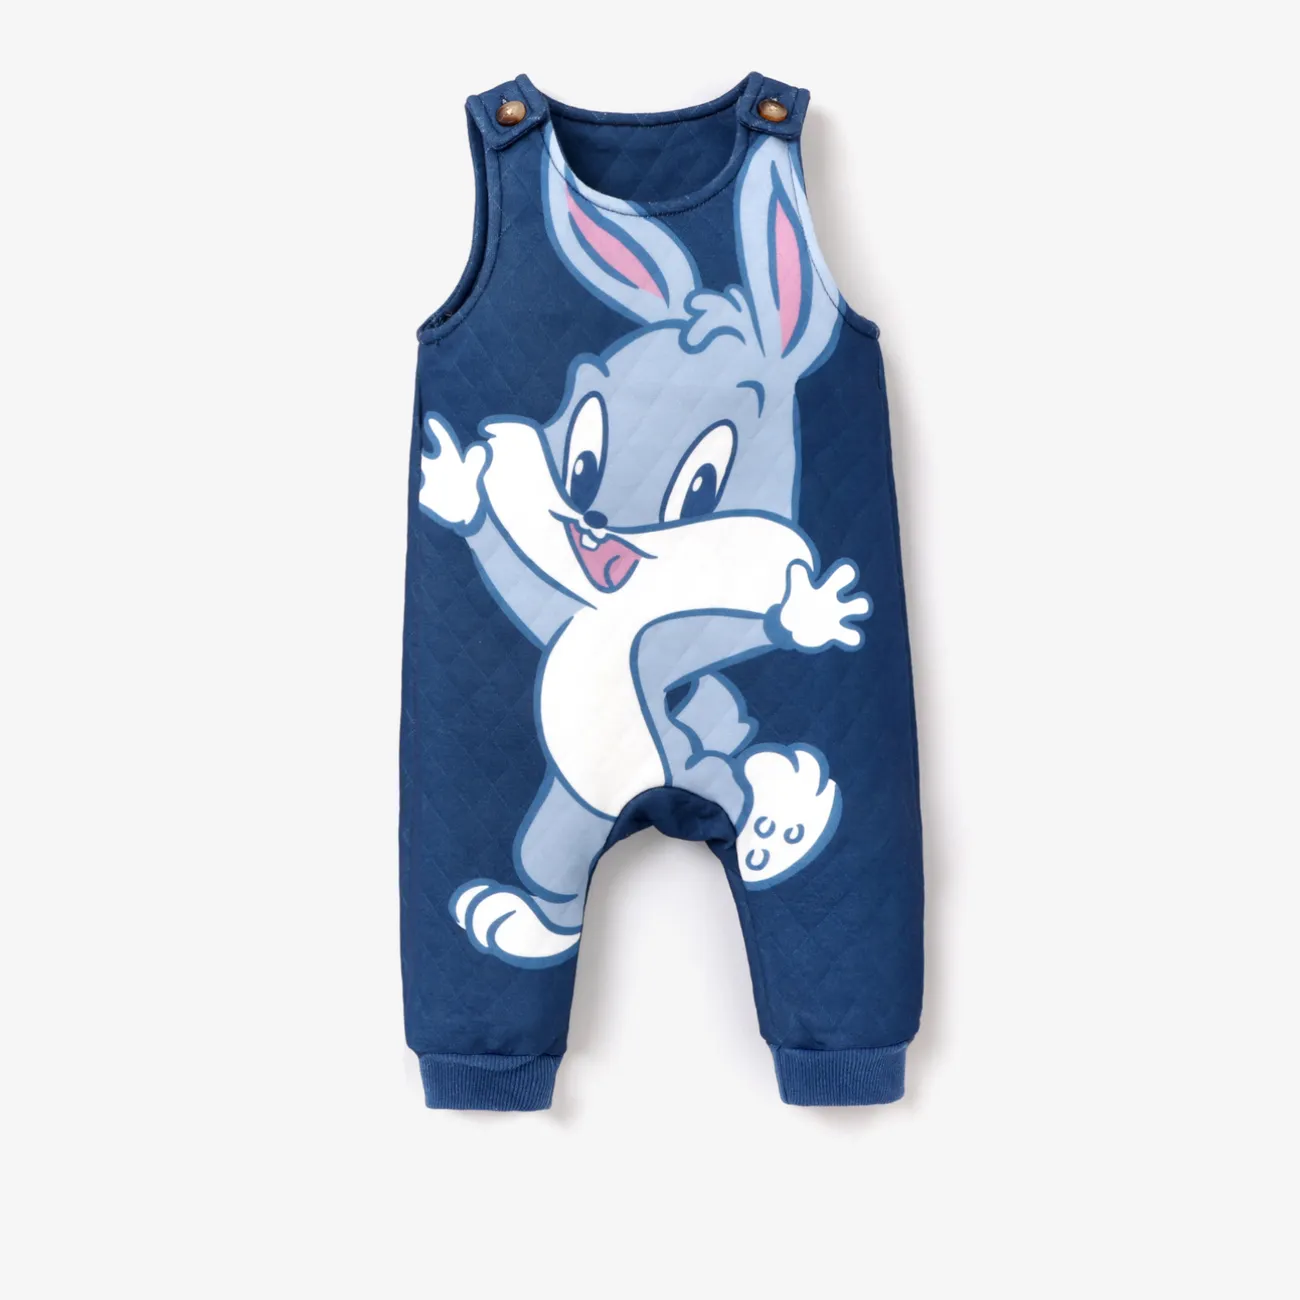 Looney Tunes Baby Boy/Girl Character Graphic Print Top or Jumpsuit Dark Blue big image 1